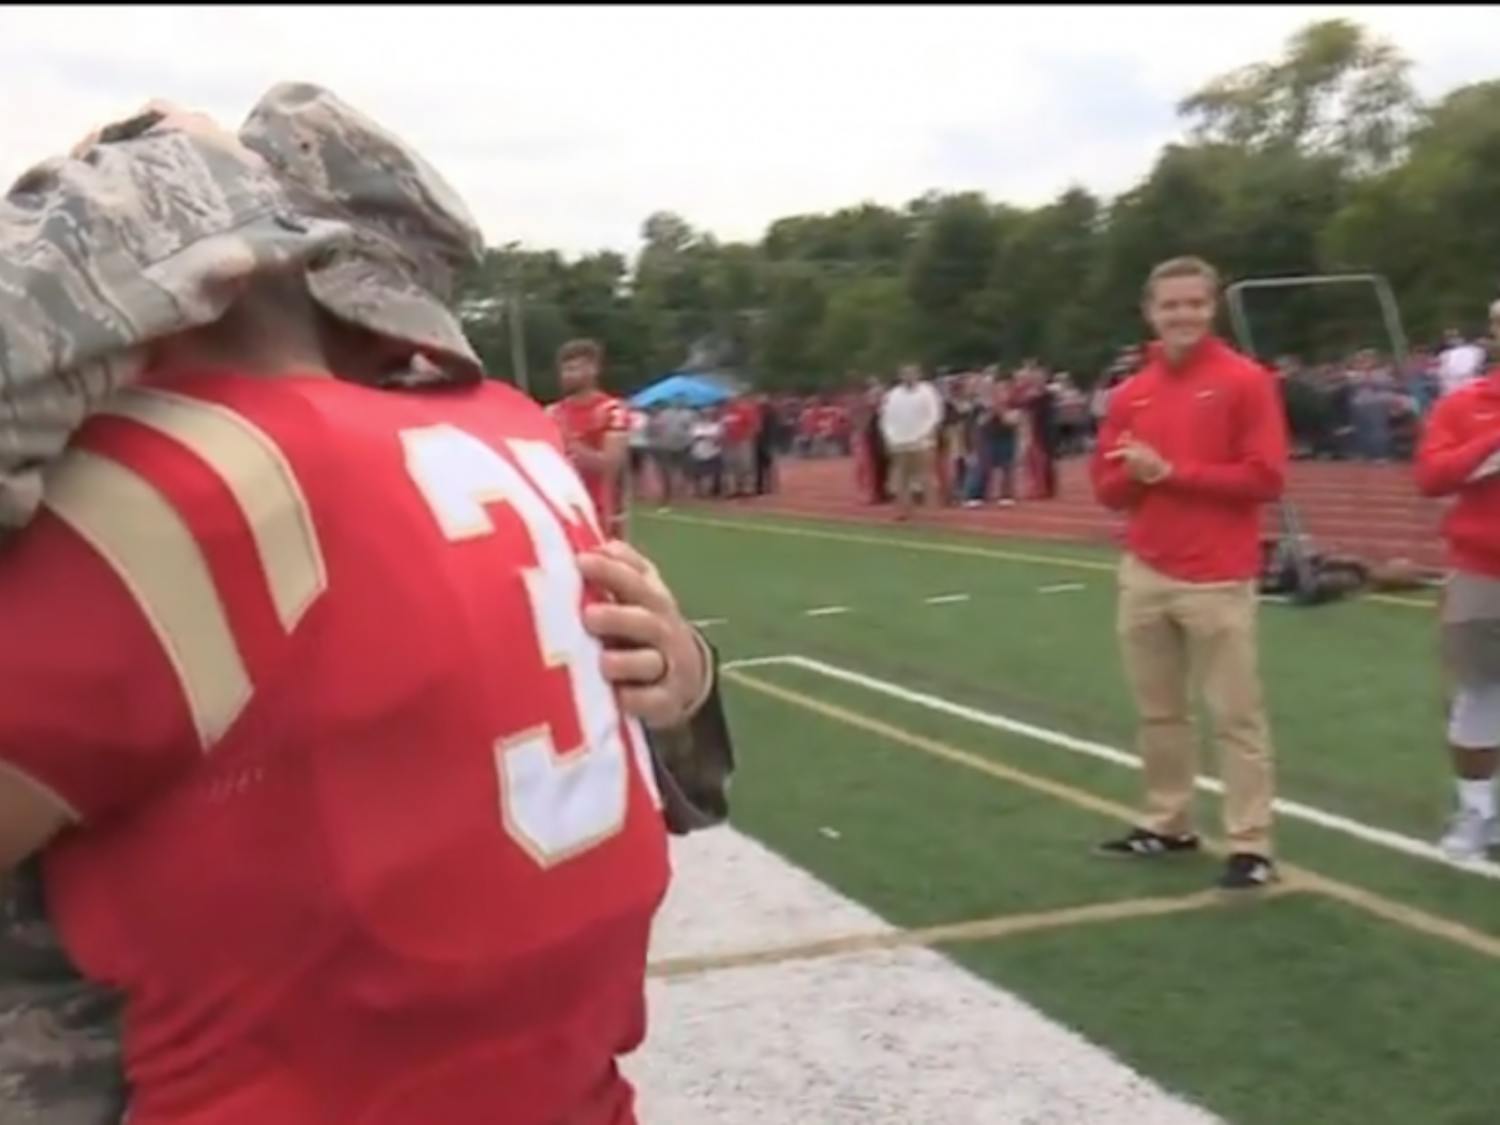 Senior football player Nick Toledo surprised by his&nbsp;brother who he hadn't seen in three years.